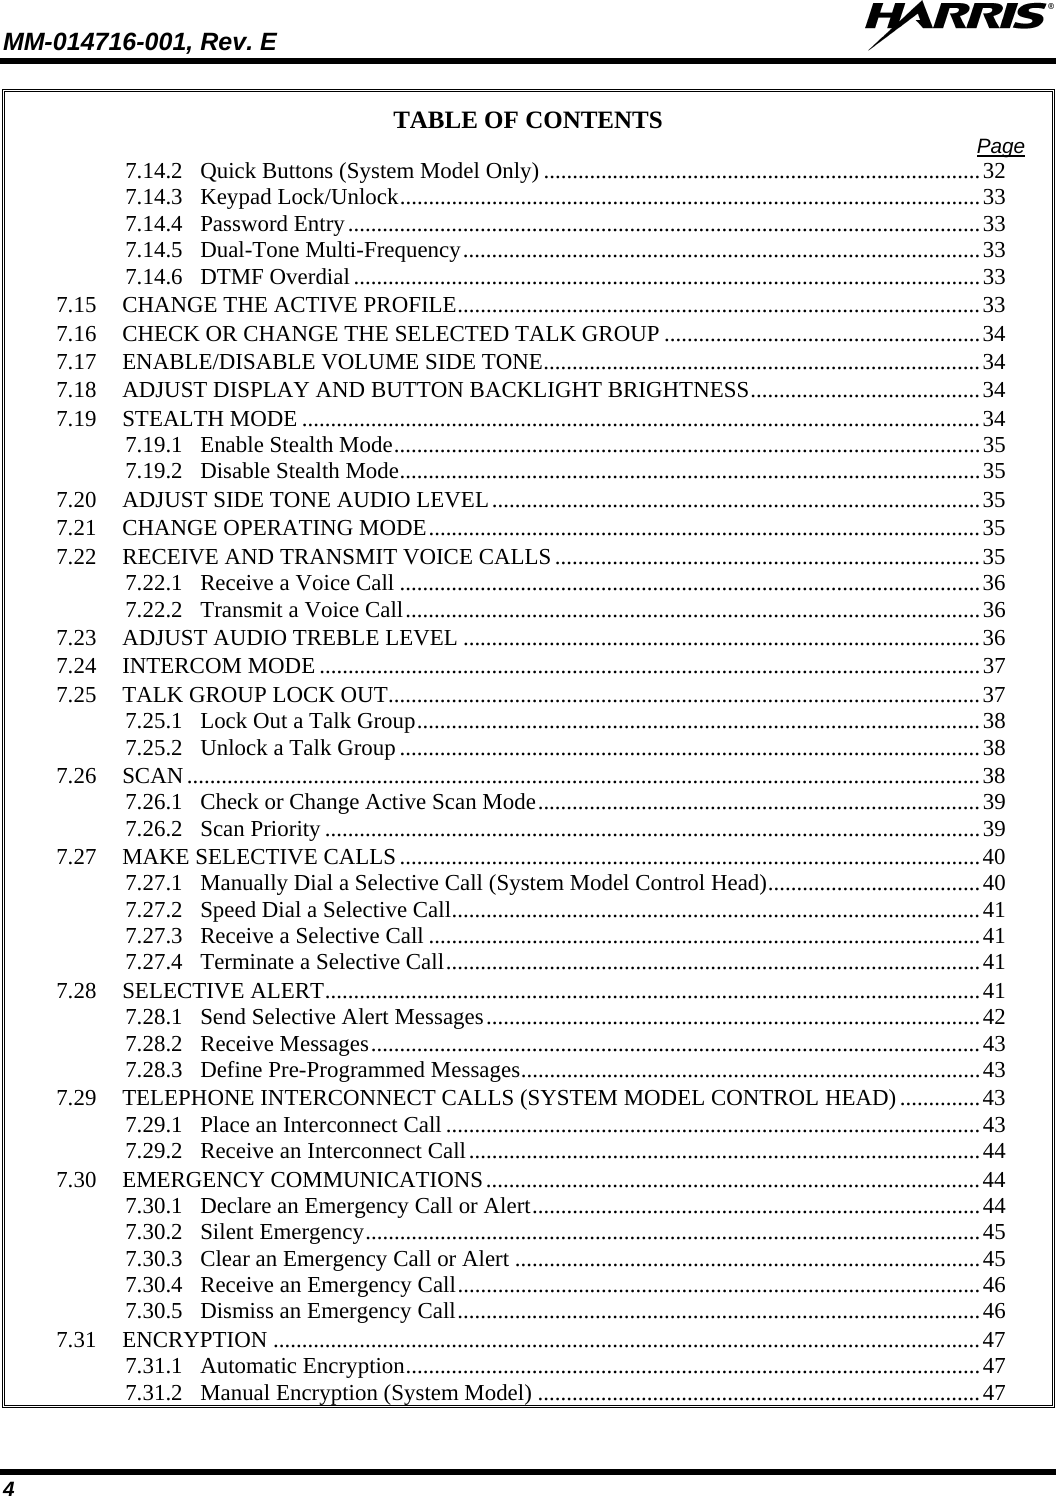 MM-014716-001, Rev. E  4 TABLE OF CONTENTS  Page 7.14.2 Quick Buttons (System Model Only) ............................................................................32 7.14.3 Keypad Lock/Unlock.....................................................................................................33 7.14.4 Password Entry..............................................................................................................33 7.14.5 Dual-Tone Multi-Frequency..........................................................................................33 7.14.6 DTMF Overdial .............................................................................................................33 7.15 CHANGE THE ACTIVE PROFILE...........................................................................................33 7.16 CHECK OR CHANGE THE SELECTED TALK GROUP .......................................................34 7.17 ENABLE/DISABLE VOLUME SIDE TONE............................................................................34 7.18 ADJUST DISPLAY AND BUTTON BACKLIGHT BRIGHTNESS........................................34 7.19 STEALTH MODE ......................................................................................................................34 7.19.1 Enable Stealth Mode......................................................................................................35 7.19.2 Disable Stealth Mode.....................................................................................................35 7.20 ADJUST SIDE TONE AUDIO LEVEL.....................................................................................35 7.21 CHANGE OPERATING MODE................................................................................................35 7.22 RECEIVE AND TRANSMIT VOICE CALLS ..........................................................................35 7.22.1 Receive a Voice Call .....................................................................................................36 7.22.2 Transmit a Voice Call....................................................................................................36 7.23 ADJUST AUDIO TREBLE LEVEL ..........................................................................................36 7.24 INTERCOM MODE ...................................................................................................................37 7.25 TALK GROUP LOCK OUT.......................................................................................................37 7.25.1 Lock Out a Talk Group..................................................................................................38 7.25.2 Unlock a Talk Group .....................................................................................................38 7.26 SCAN ..........................................................................................................................................38 7.26.1 Check or Change Active Scan Mode.............................................................................39 7.26.2 Scan Priority ..................................................................................................................39 7.27 MAKE SELECTIVE CALLS .....................................................................................................40 7.27.1 Manually Dial a Selective Call (System Model Control Head).....................................40 7.27.2 Speed Dial a Selective Call............................................................................................41 7.27.3 Receive a Selective Call ................................................................................................41 7.27.4 Terminate a Selective Call.............................................................................................41 7.28 SELECTIVE ALERT..................................................................................................................41 7.28.1 Send Selective Alert Messages......................................................................................42 7.28.2 Receive Messages..........................................................................................................43 7.28.3 Define Pre-Programmed Messages................................................................................43 7.29 TELEPHONE INTERCONNECT CALLS (SYSTEM MODEL CONTROL HEAD) ..............43 7.29.1 Place an Interconnect Call .............................................................................................43 7.29.2 Receive an Interconnect Call.........................................................................................44 7.30 EMERGENCY COMMUNICATIONS......................................................................................44 7.30.1 Declare an Emergency Call or Alert..............................................................................44 7.30.2 Silent Emergency...........................................................................................................45 7.30.3 Clear an Emergency Call or Alert .................................................................................45 7.30.4 Receive an Emergency Call...........................................................................................46 7.30.5 Dismiss an Emergency Call...........................................................................................46 7.31 ENCRYPTION ...........................................................................................................................47 7.31.1 Automatic Encryption....................................................................................................47 7.31.2 Manual Encryption (System Model) .............................................................................47 